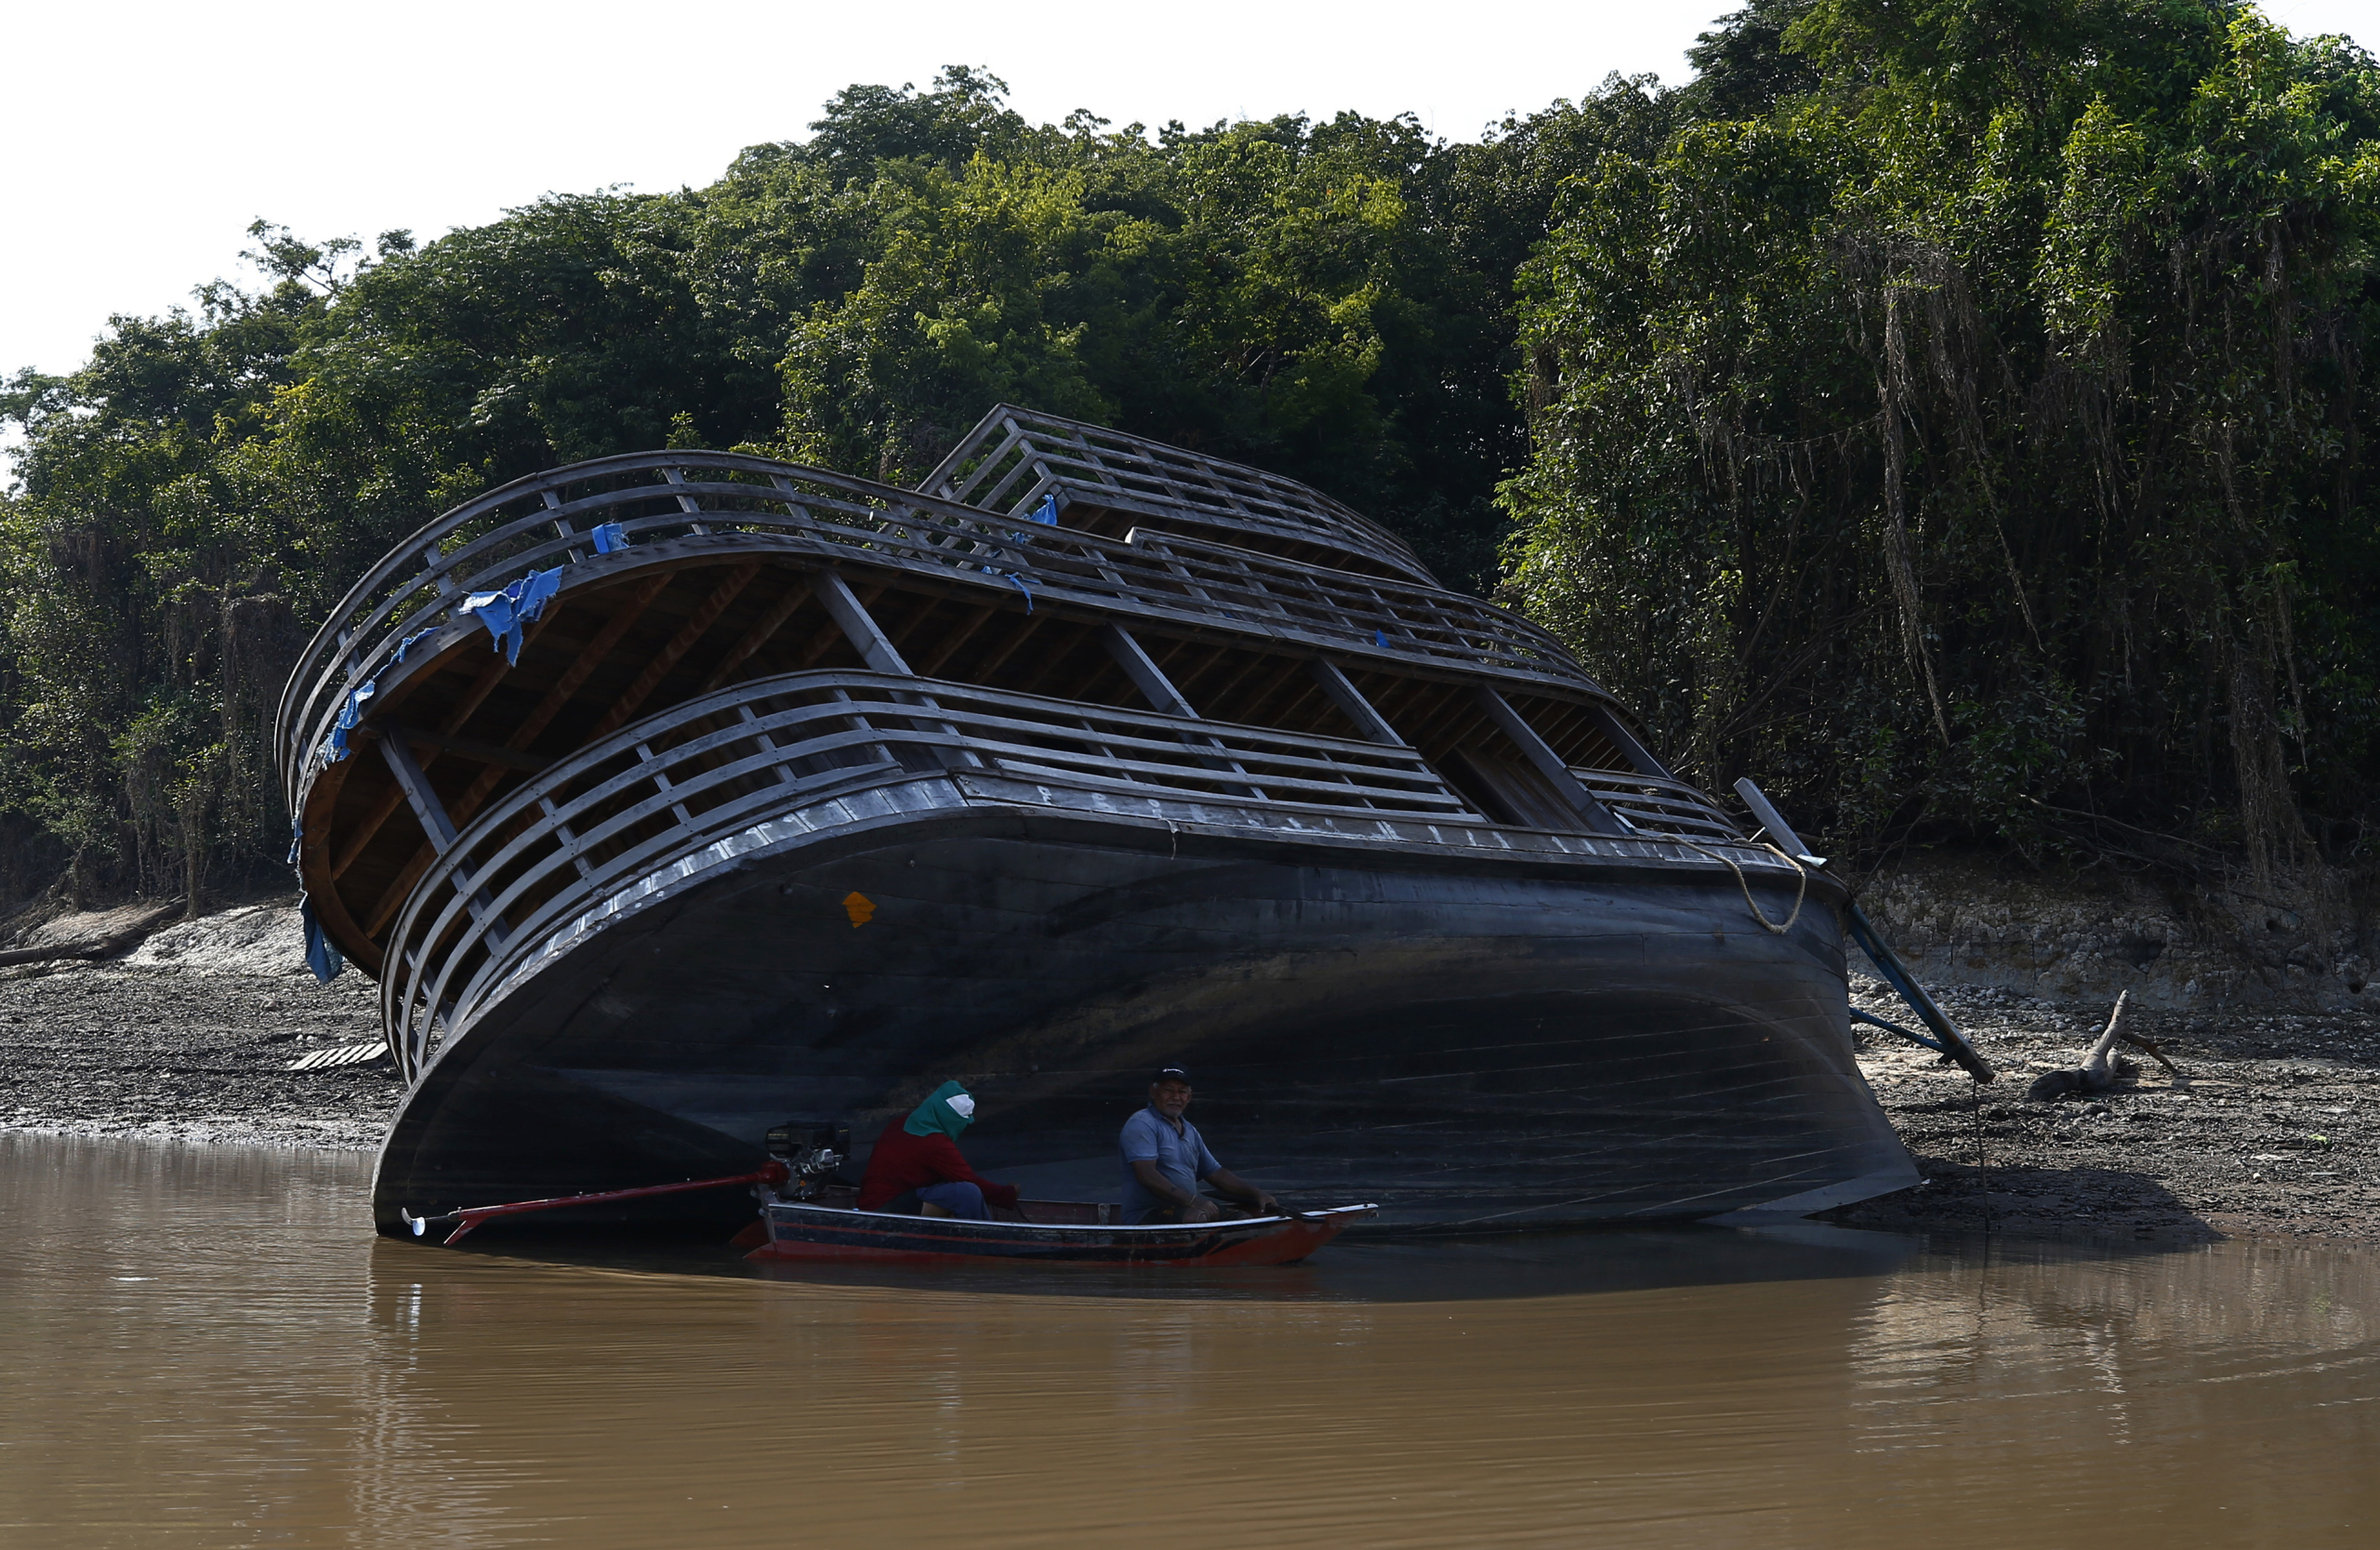 Fishermen take cover from the sun next to a riverboat that ran aground in the dried-out Puraquequara lake amid a severe drought, in Manaus, Amazonas state, Brazil, Thursday, Oct. 5, 2023. The Brazilian Amazon rainforest is facing a severe drought that may affect around 500,000 people by the end of the year. (AP Photo/Edmar Barros)Associated Press/LaPresseOnly Italy and Spain